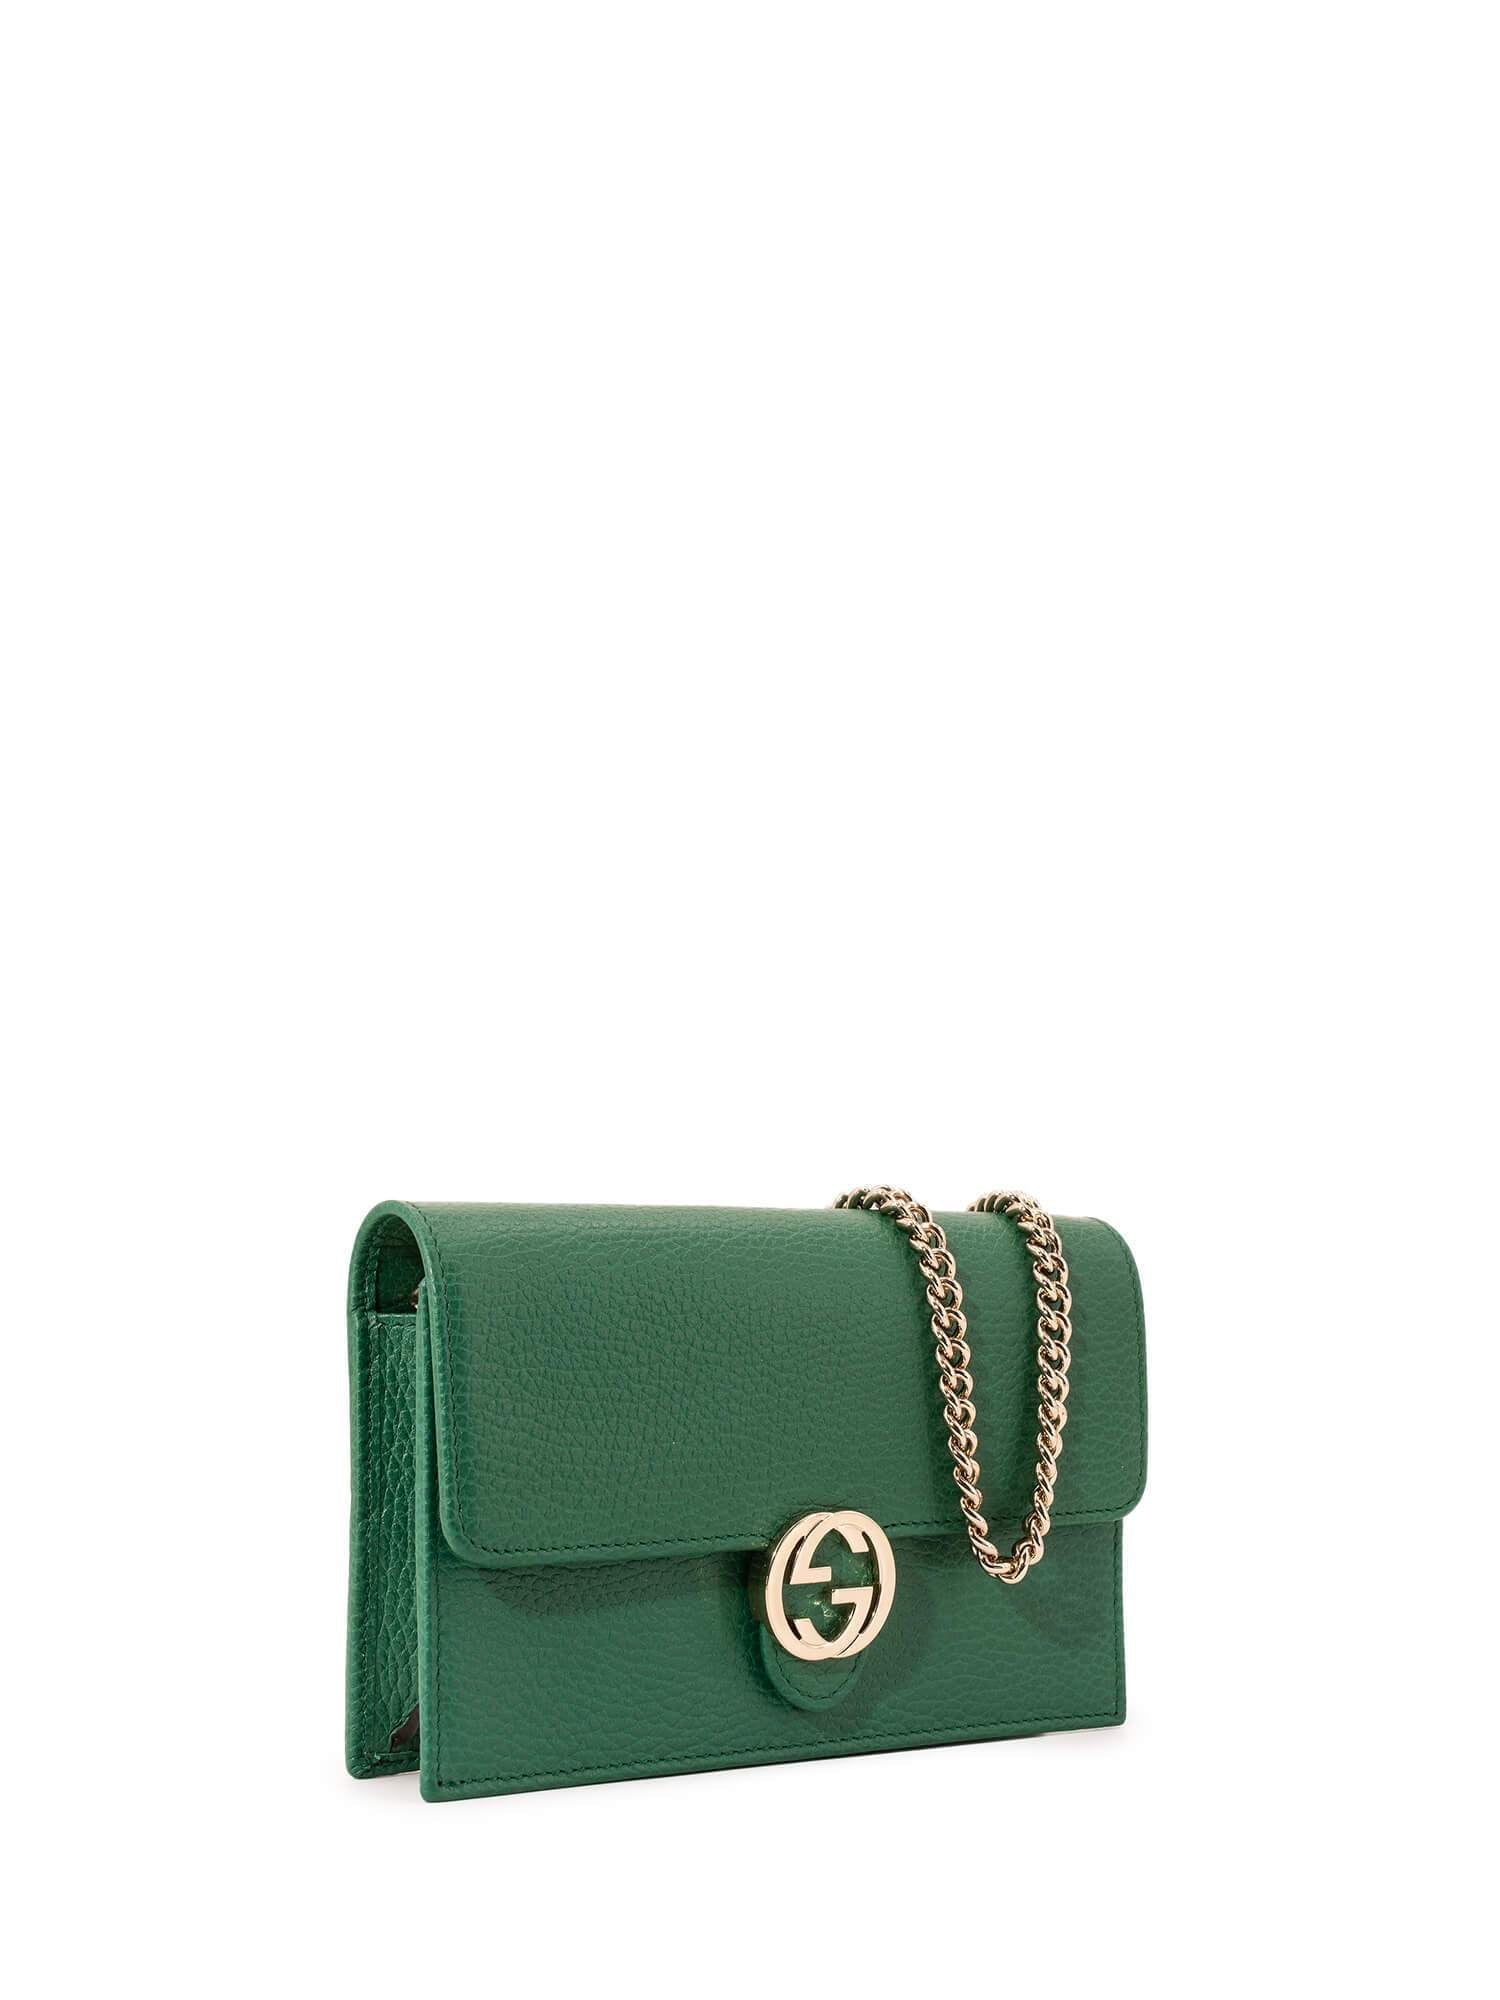 Gucci Leather GG Logo Flap Wallet On Chain Green-designer resale